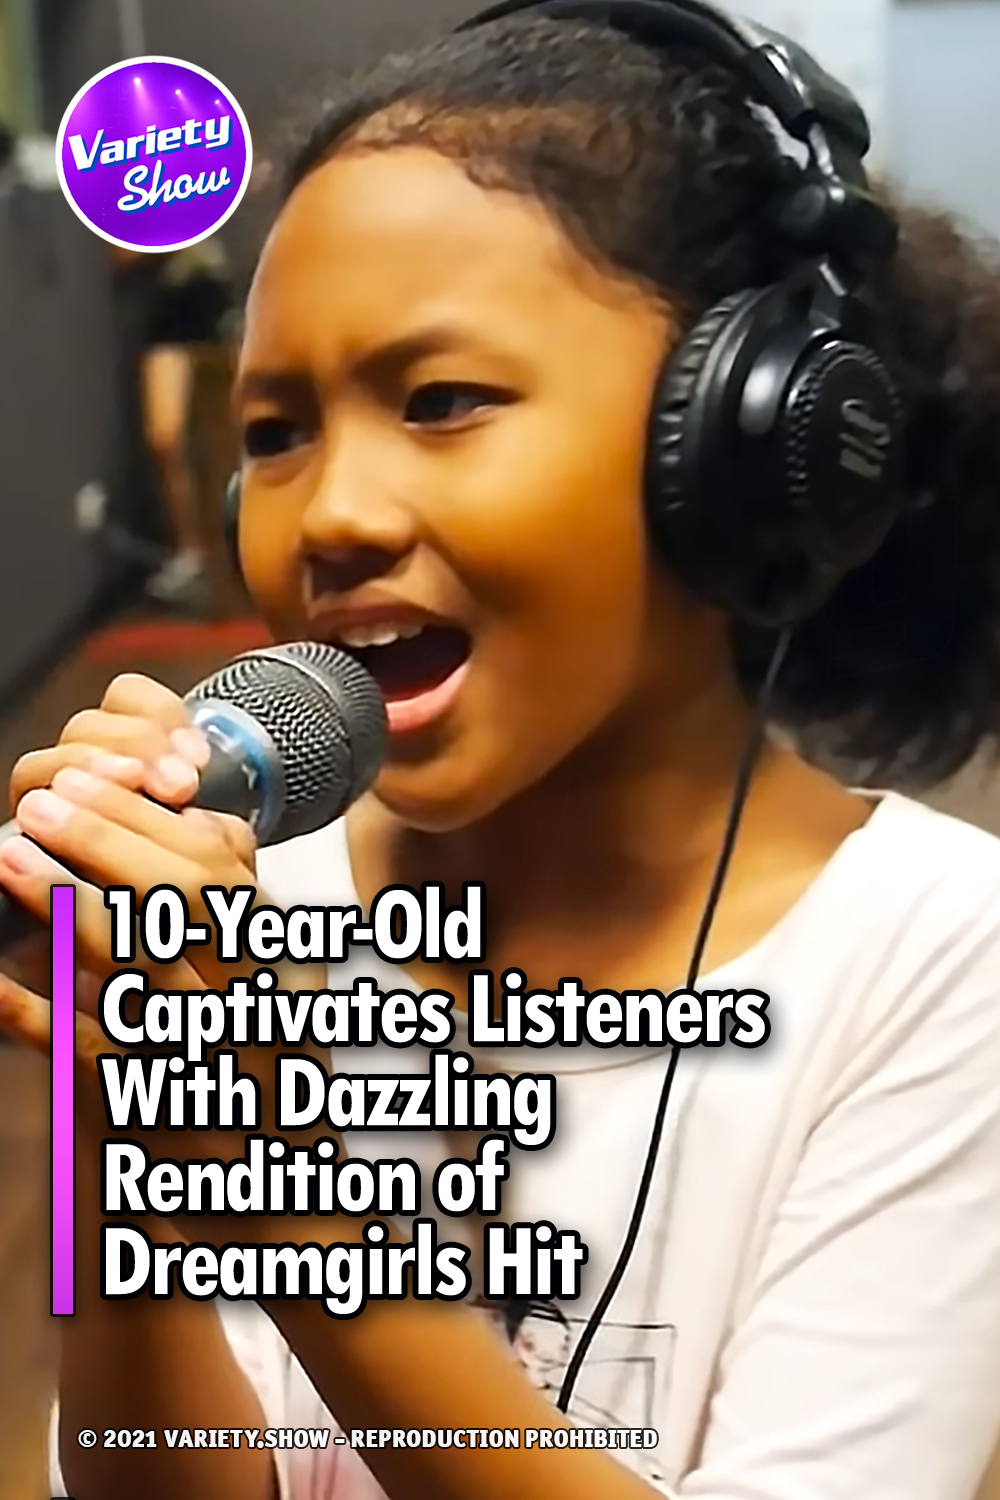 10-Year-Old Captivates Listeners With Dazzling Rendition of Dreamgirls Hit